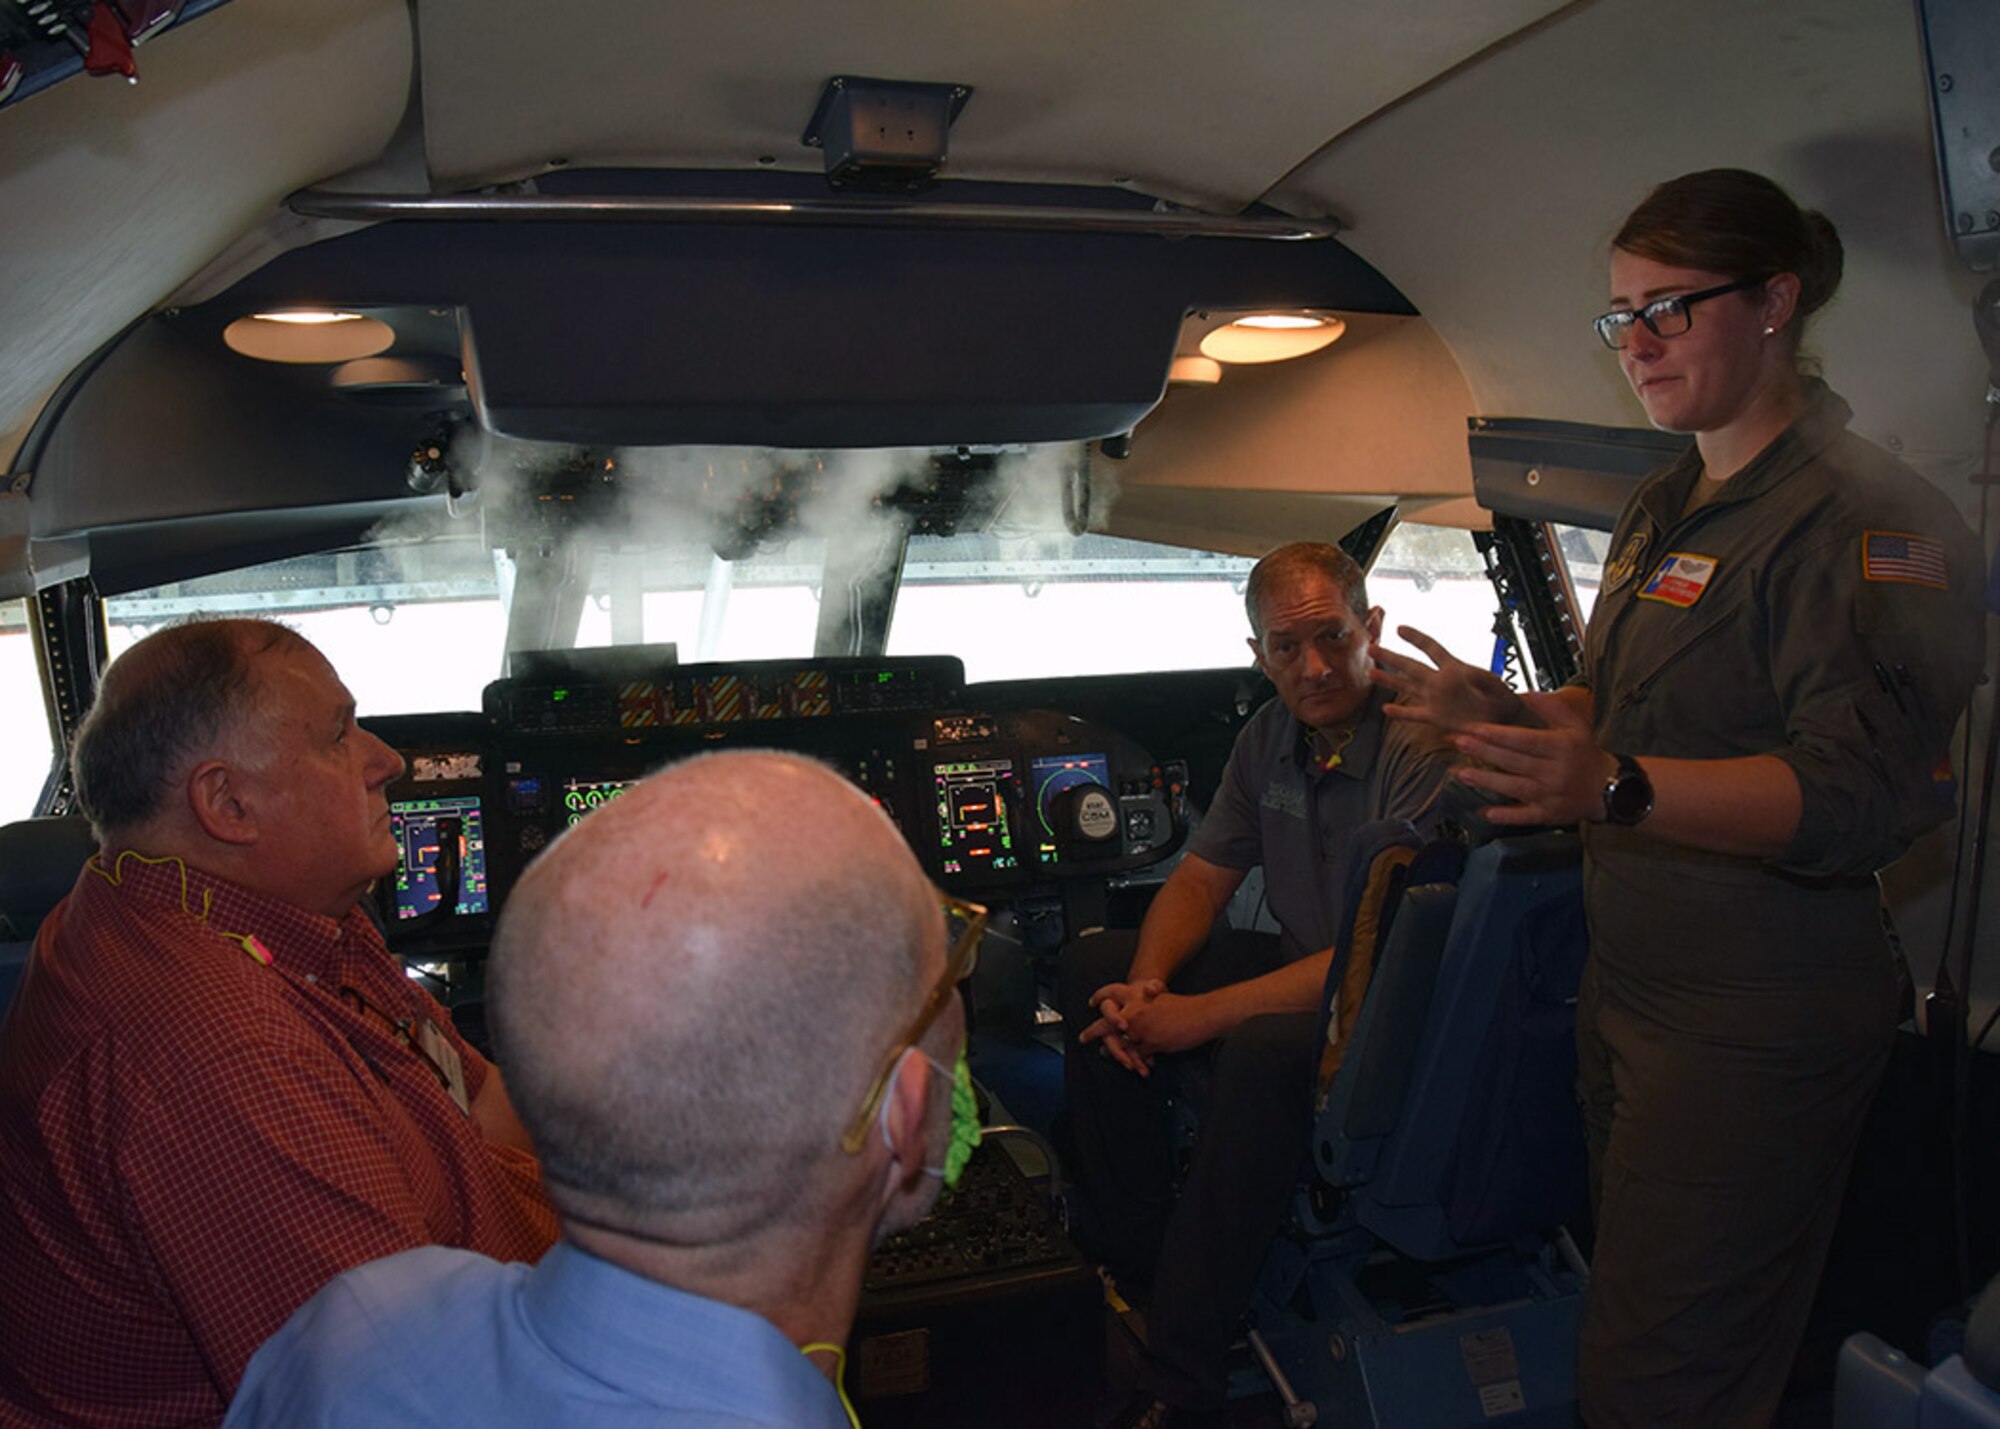 1st Lt. Rohaise Firth-Butterfield, 68nd Airlift Squadron pilot, explains her duties as a pilot to the 502nd Air Base Wing honorary commanders during a tour of the Alamo Wing’s C-5M Super Galaxy June 5, 2020 at Joint Base San Antonio-Lackland, Texas.